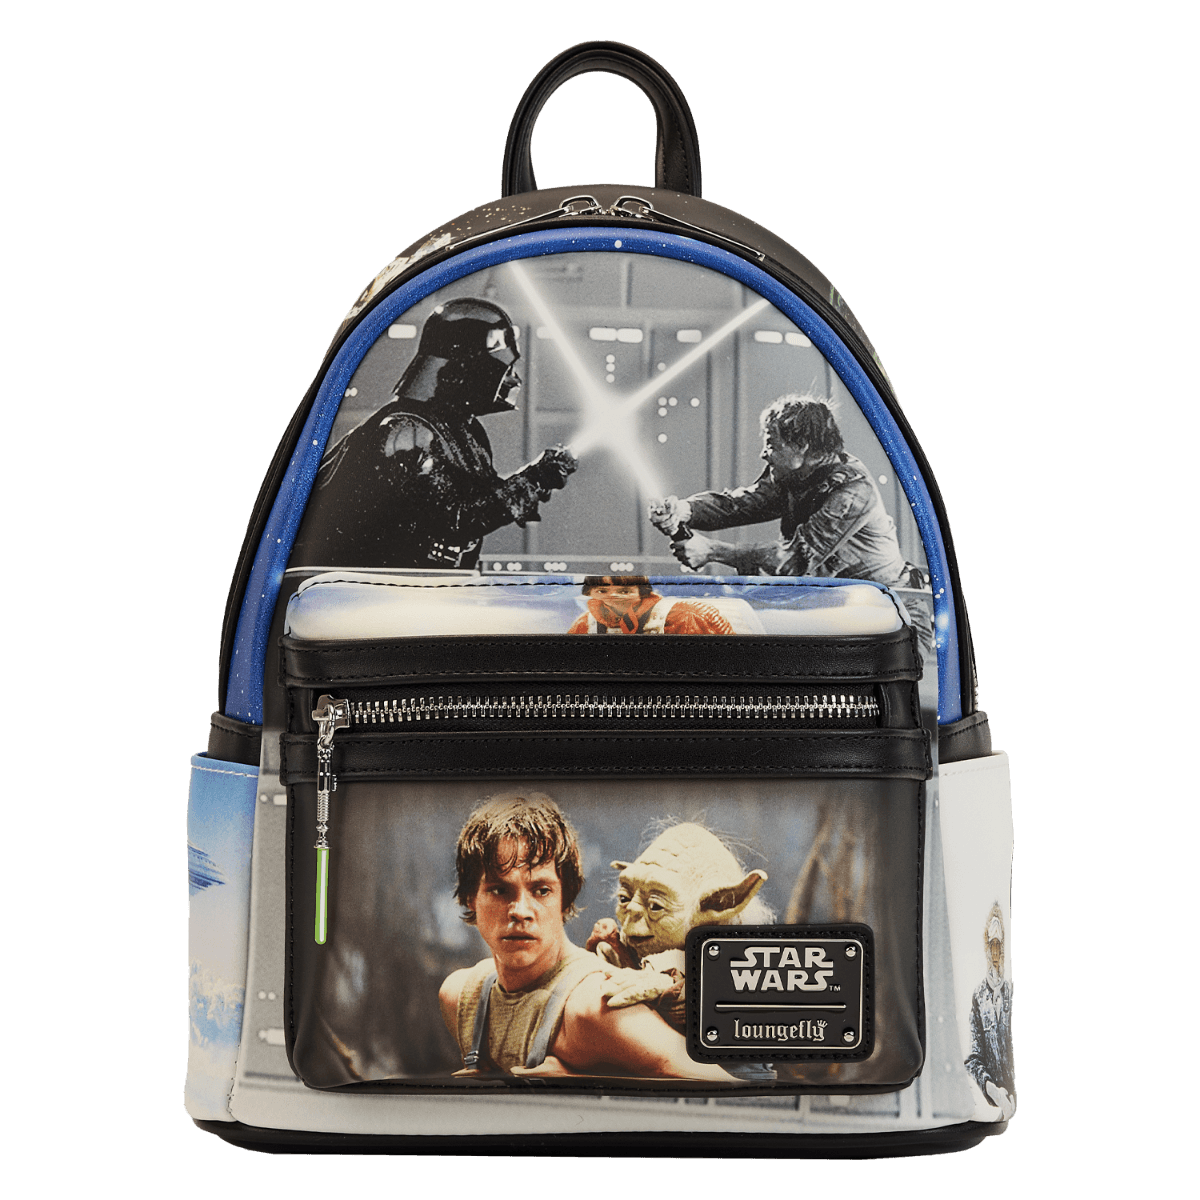 LOUSTBK0364 Star Wars Episode 5: The Empire Strikes Back - Final Frames Mini Backpack - Loungefly - Titan Pop Culture